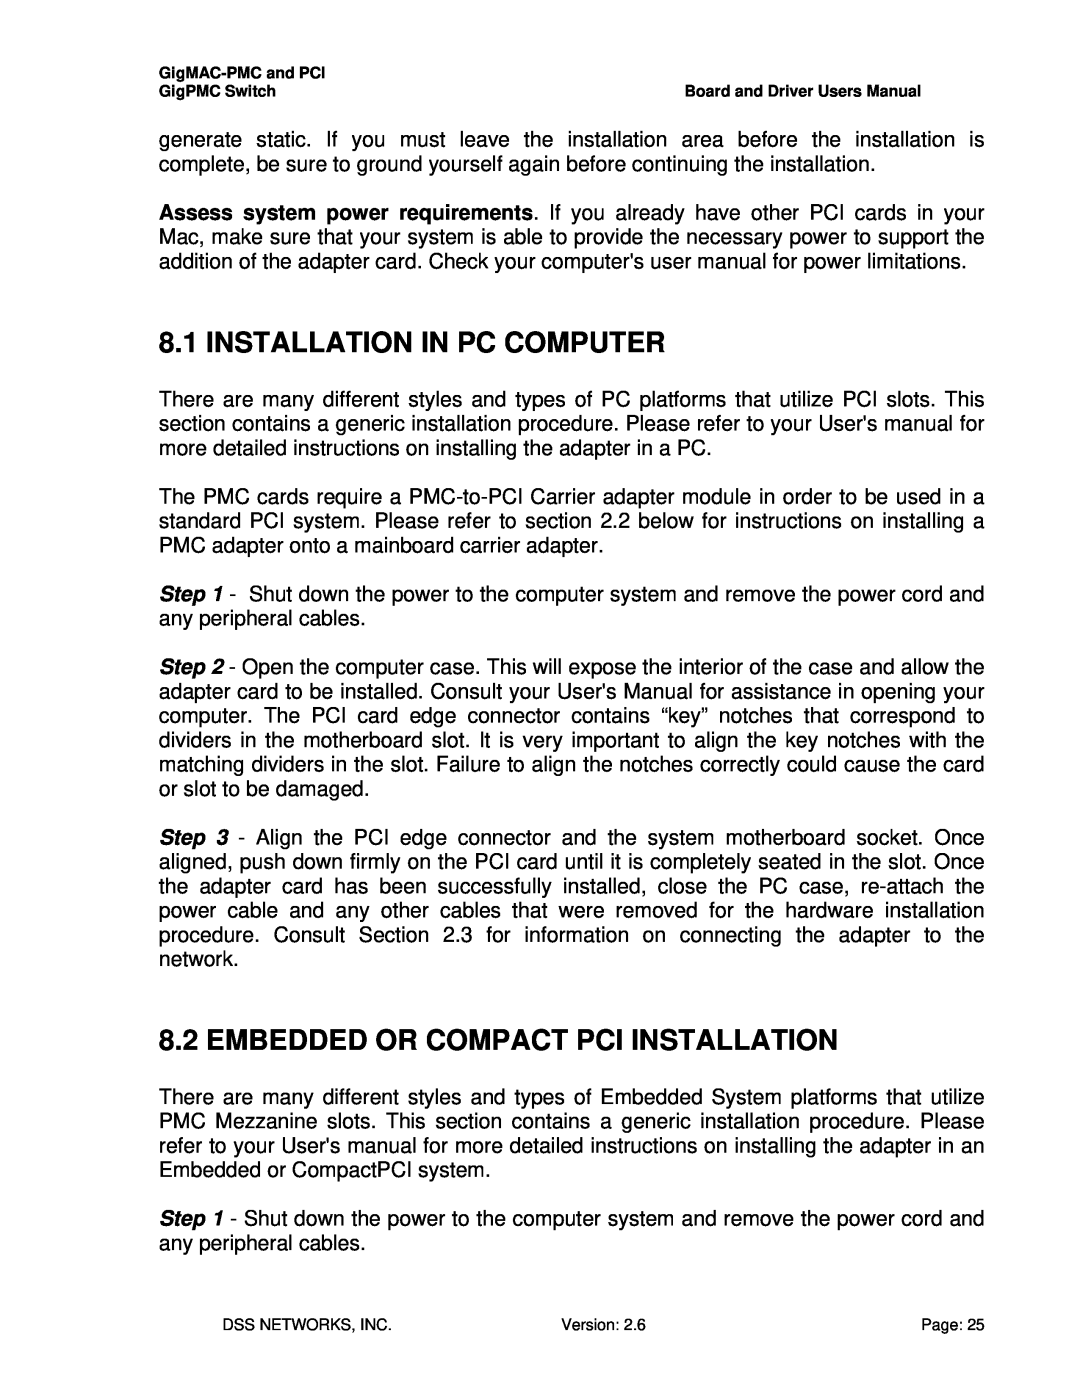 Intel PCI-X user manual Installation In Pc Computer, Embedded Or Compact Pci Installation 